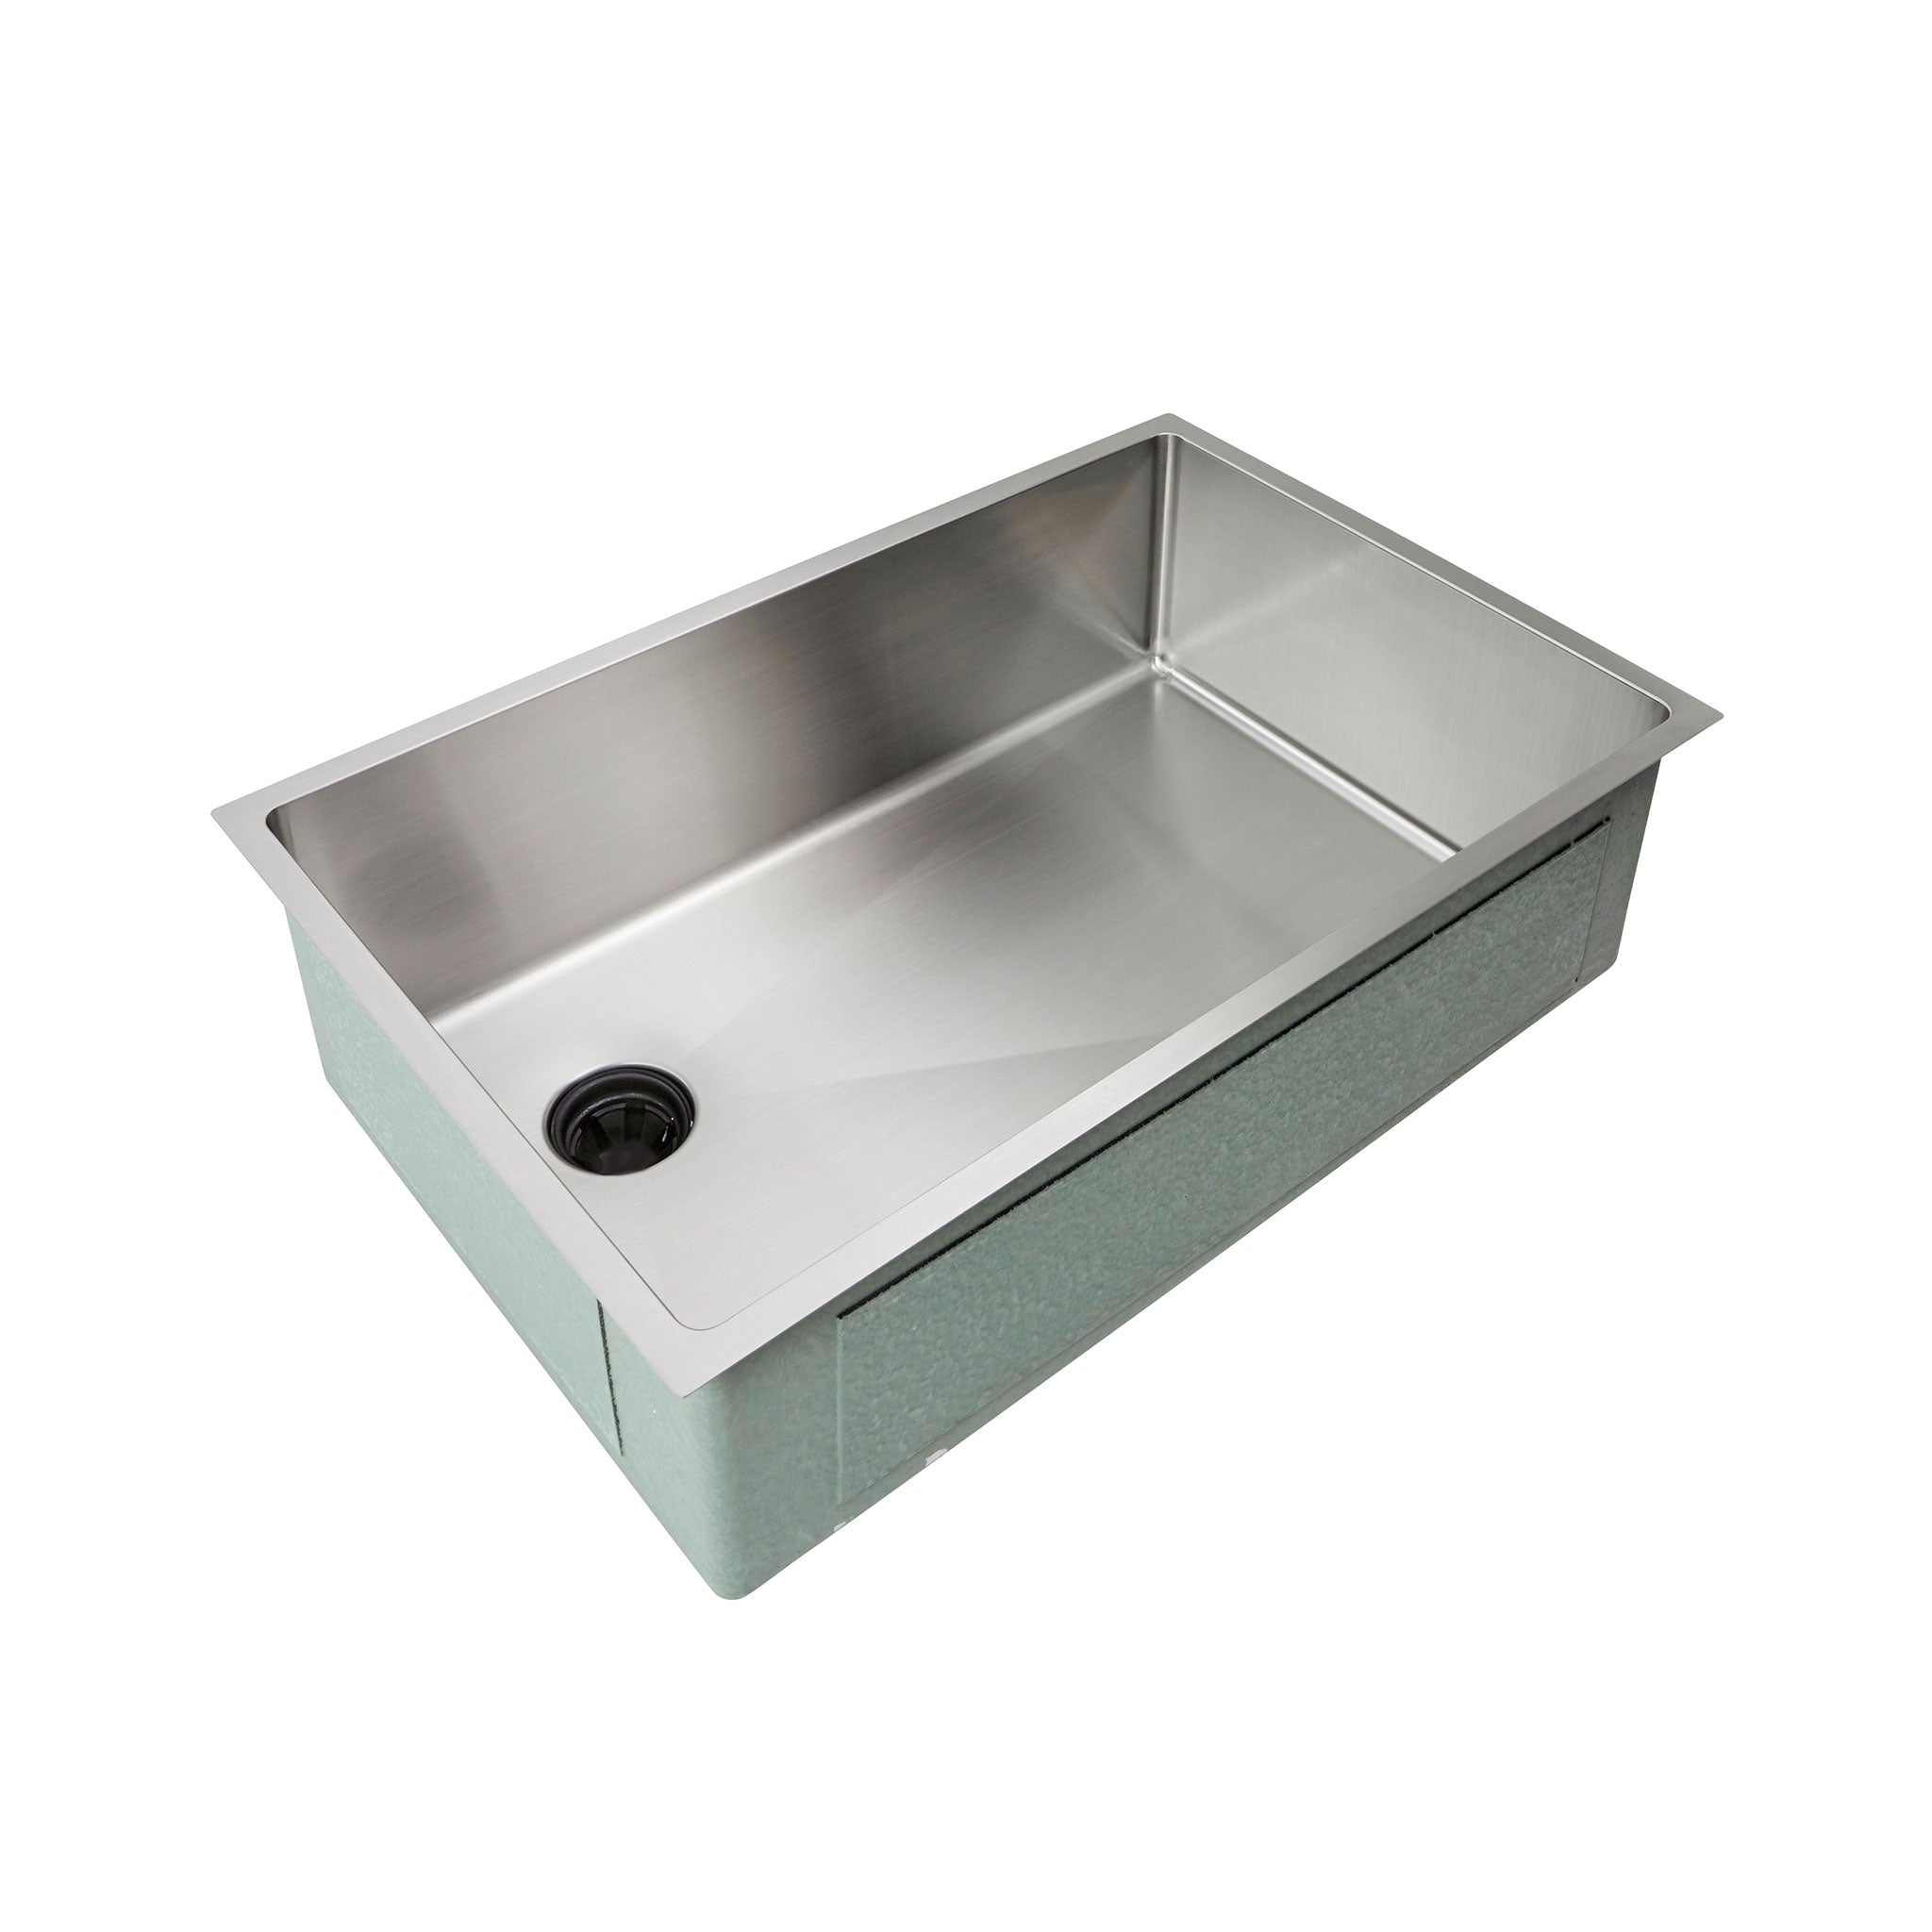 28”, 16-gauge stainless steel classic-style undermount, single basin kitchen sink with an offset, seamless drain left.